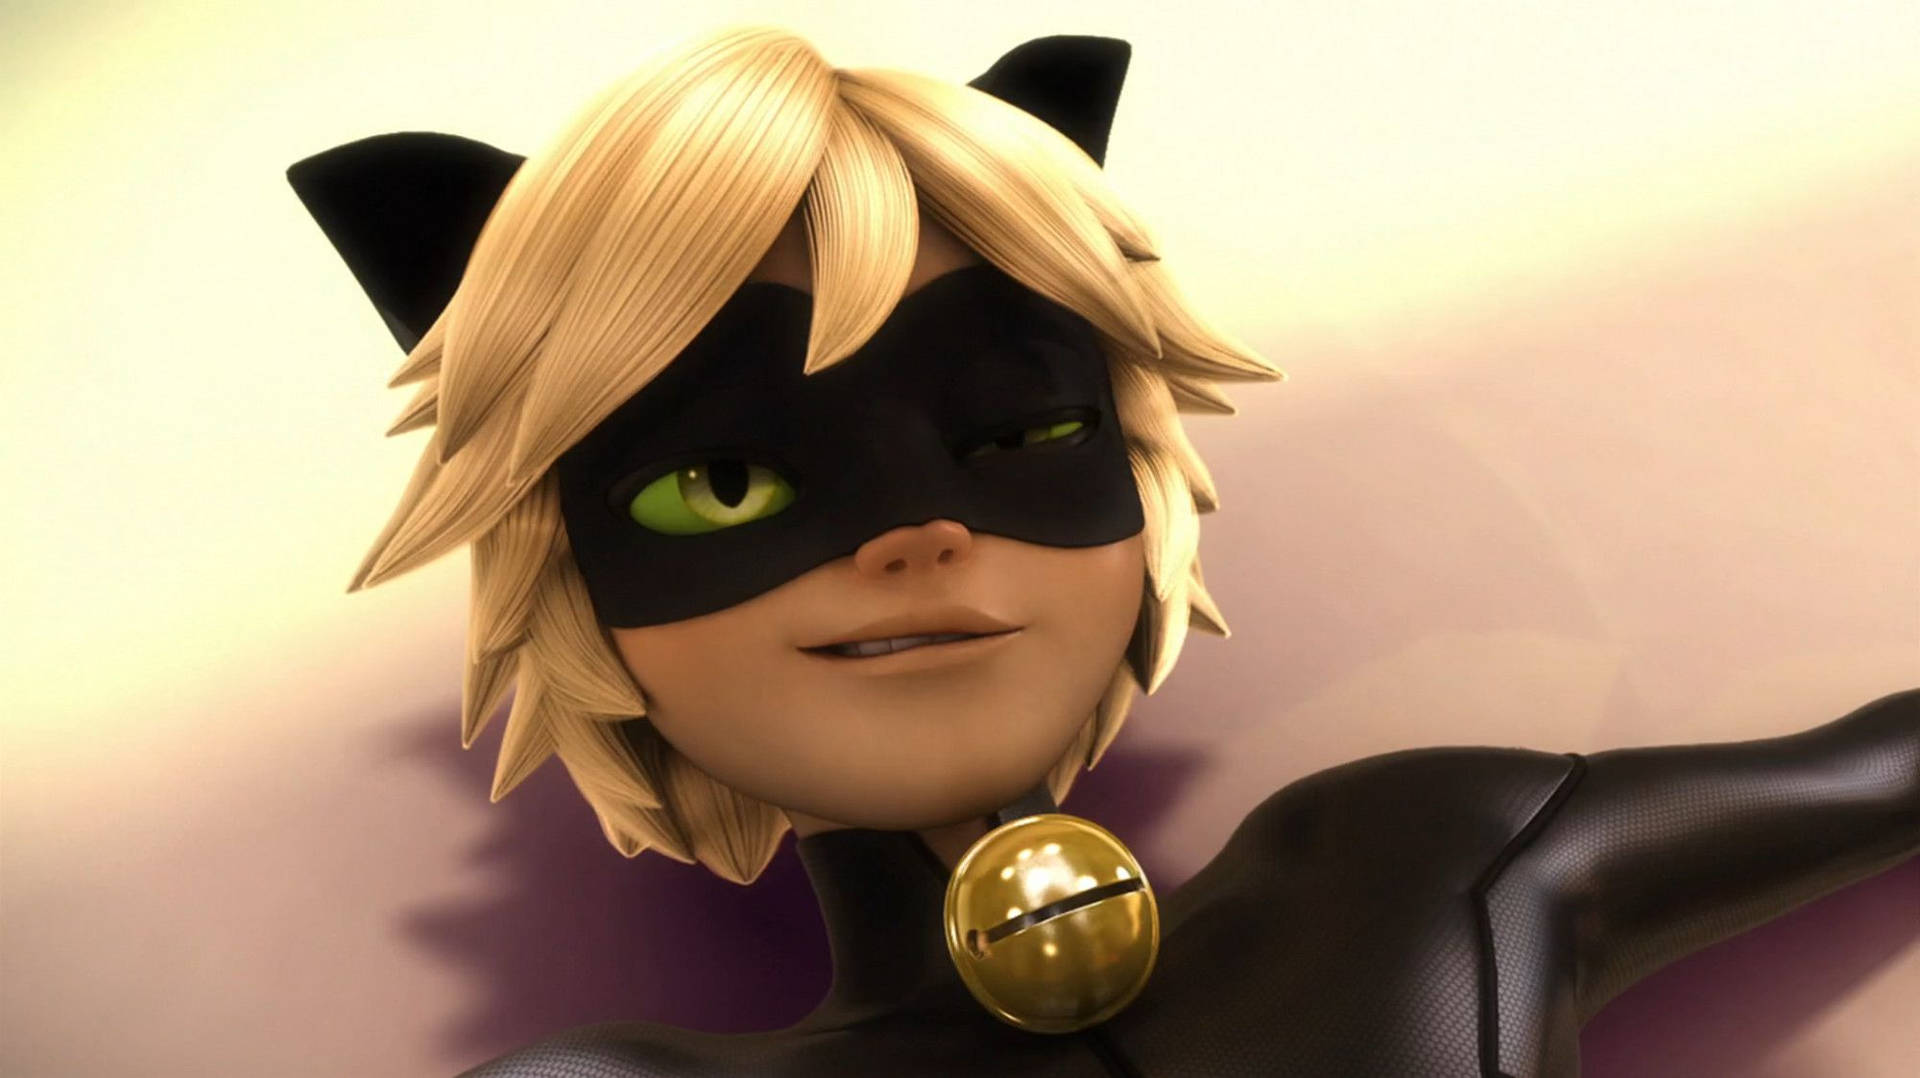 Cat Noir From Miraculous On The Ground